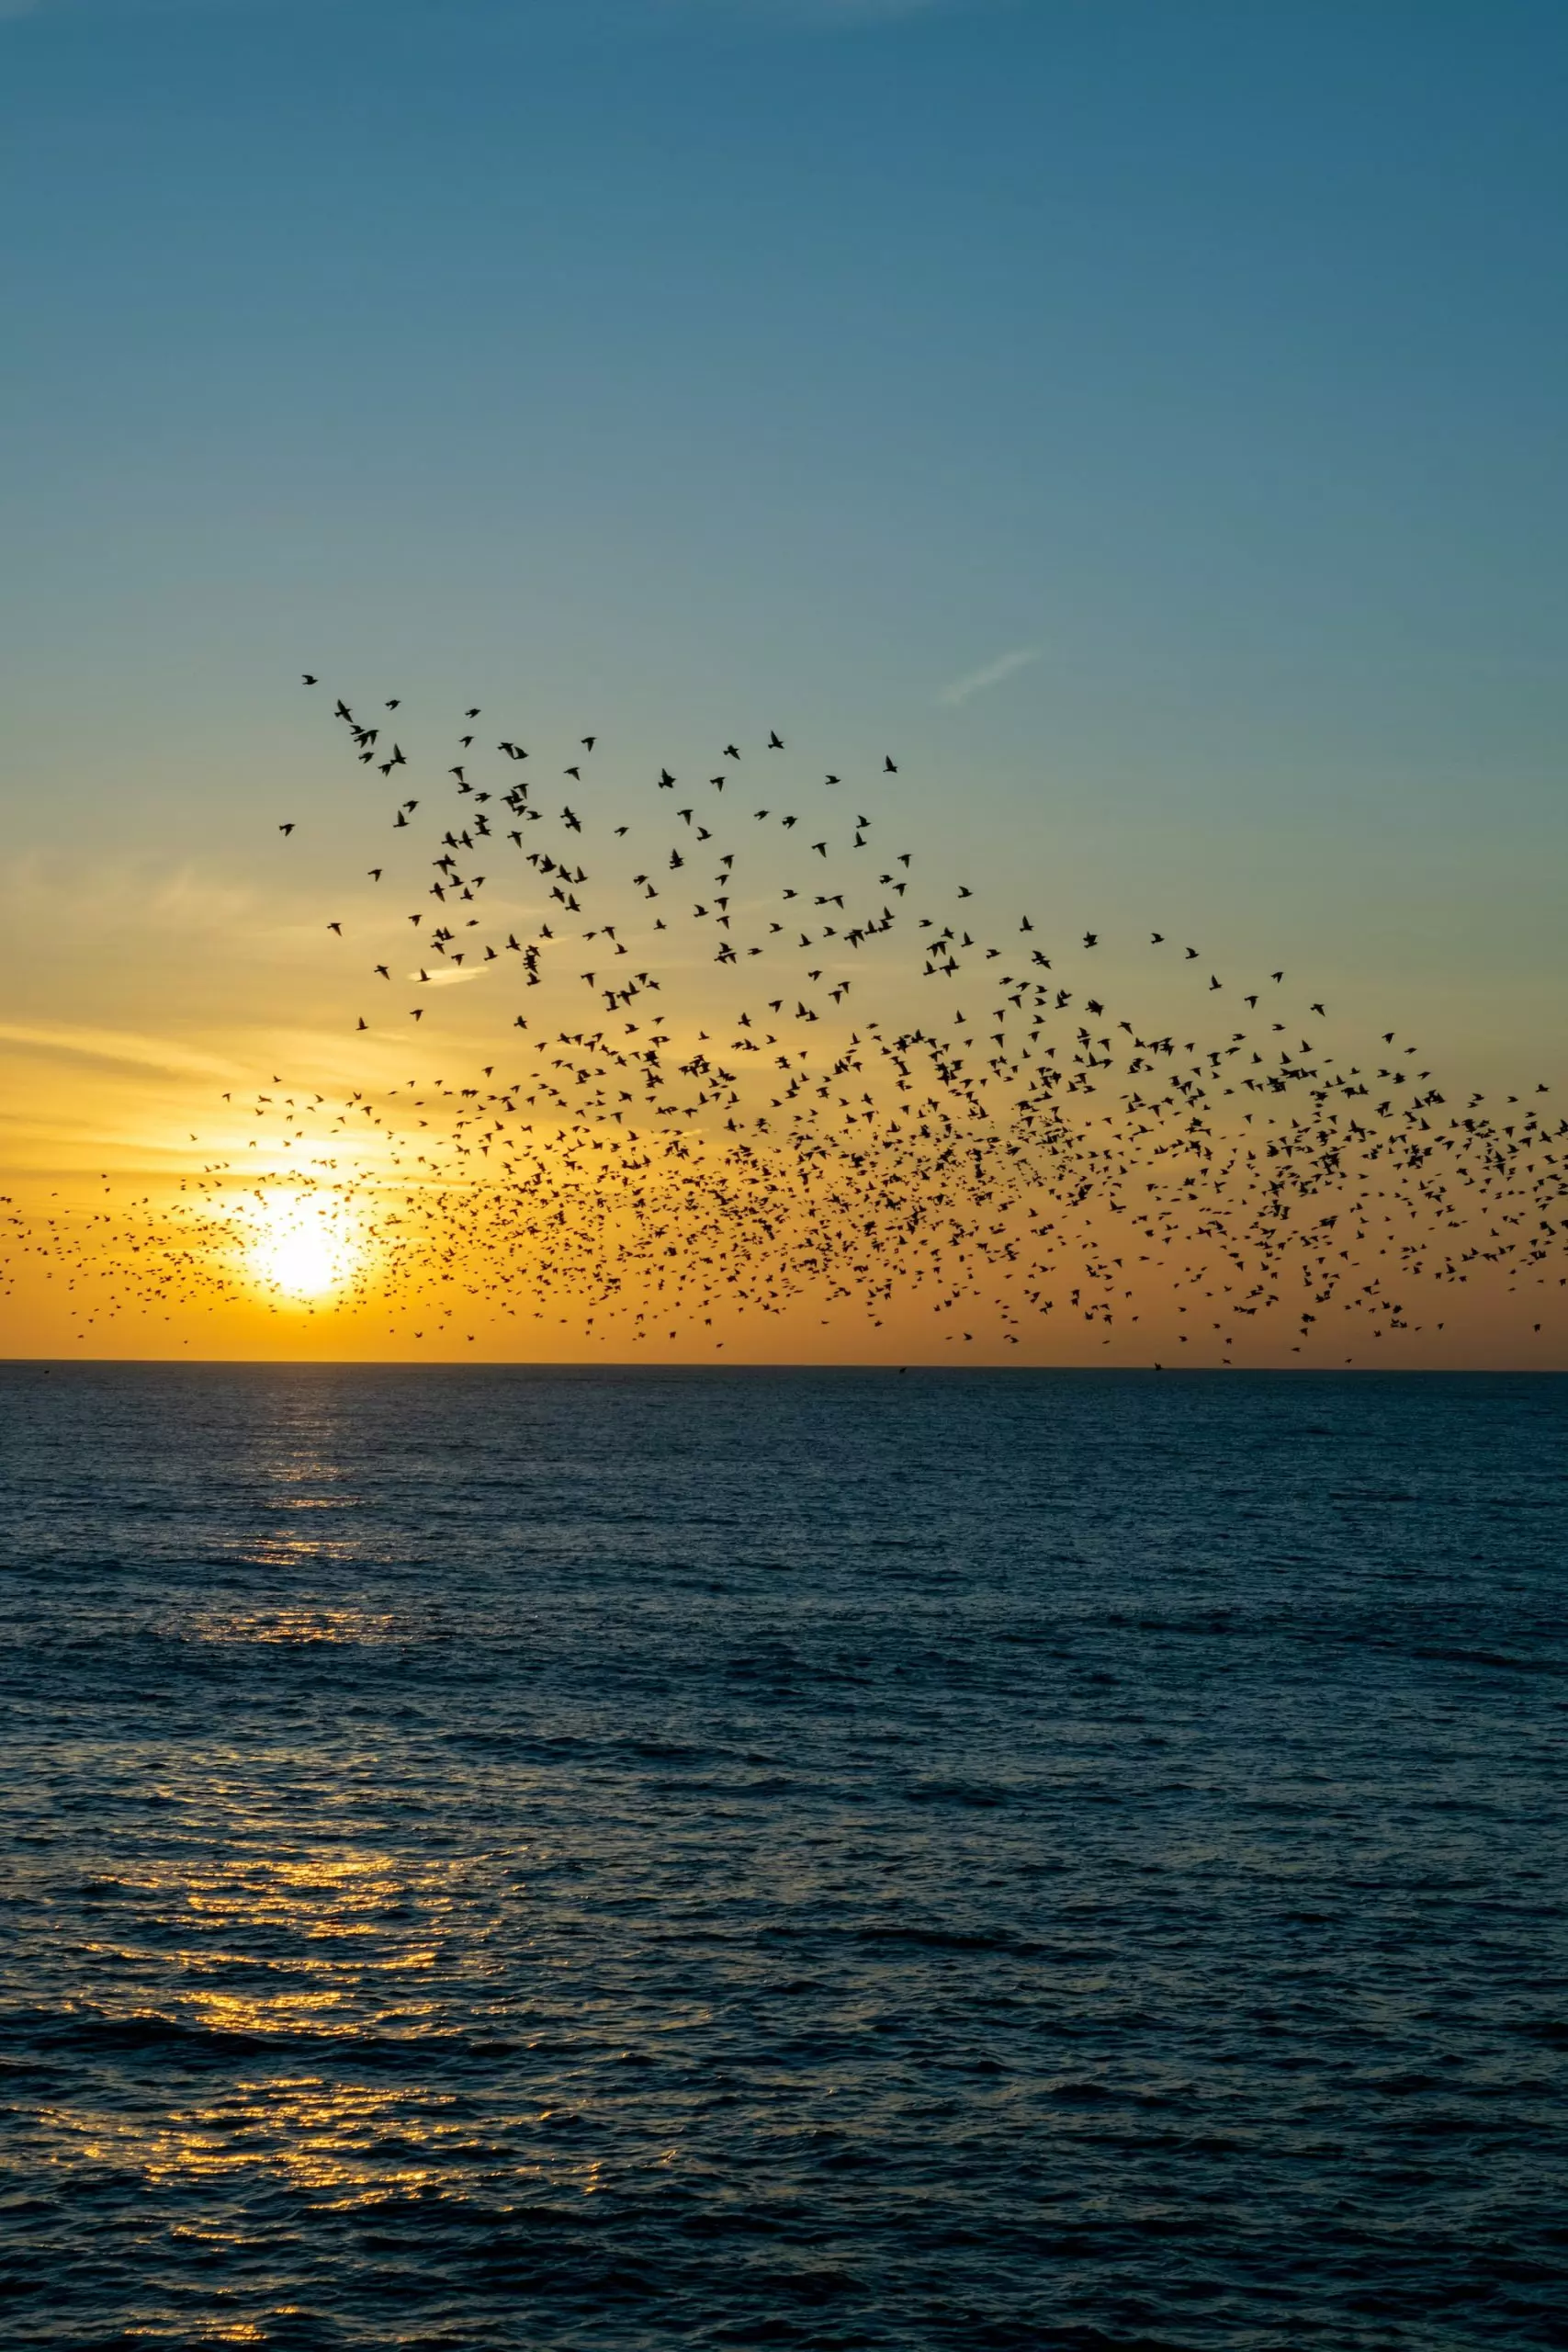 A flock of birds above the sea and silhouetted by the setting sun